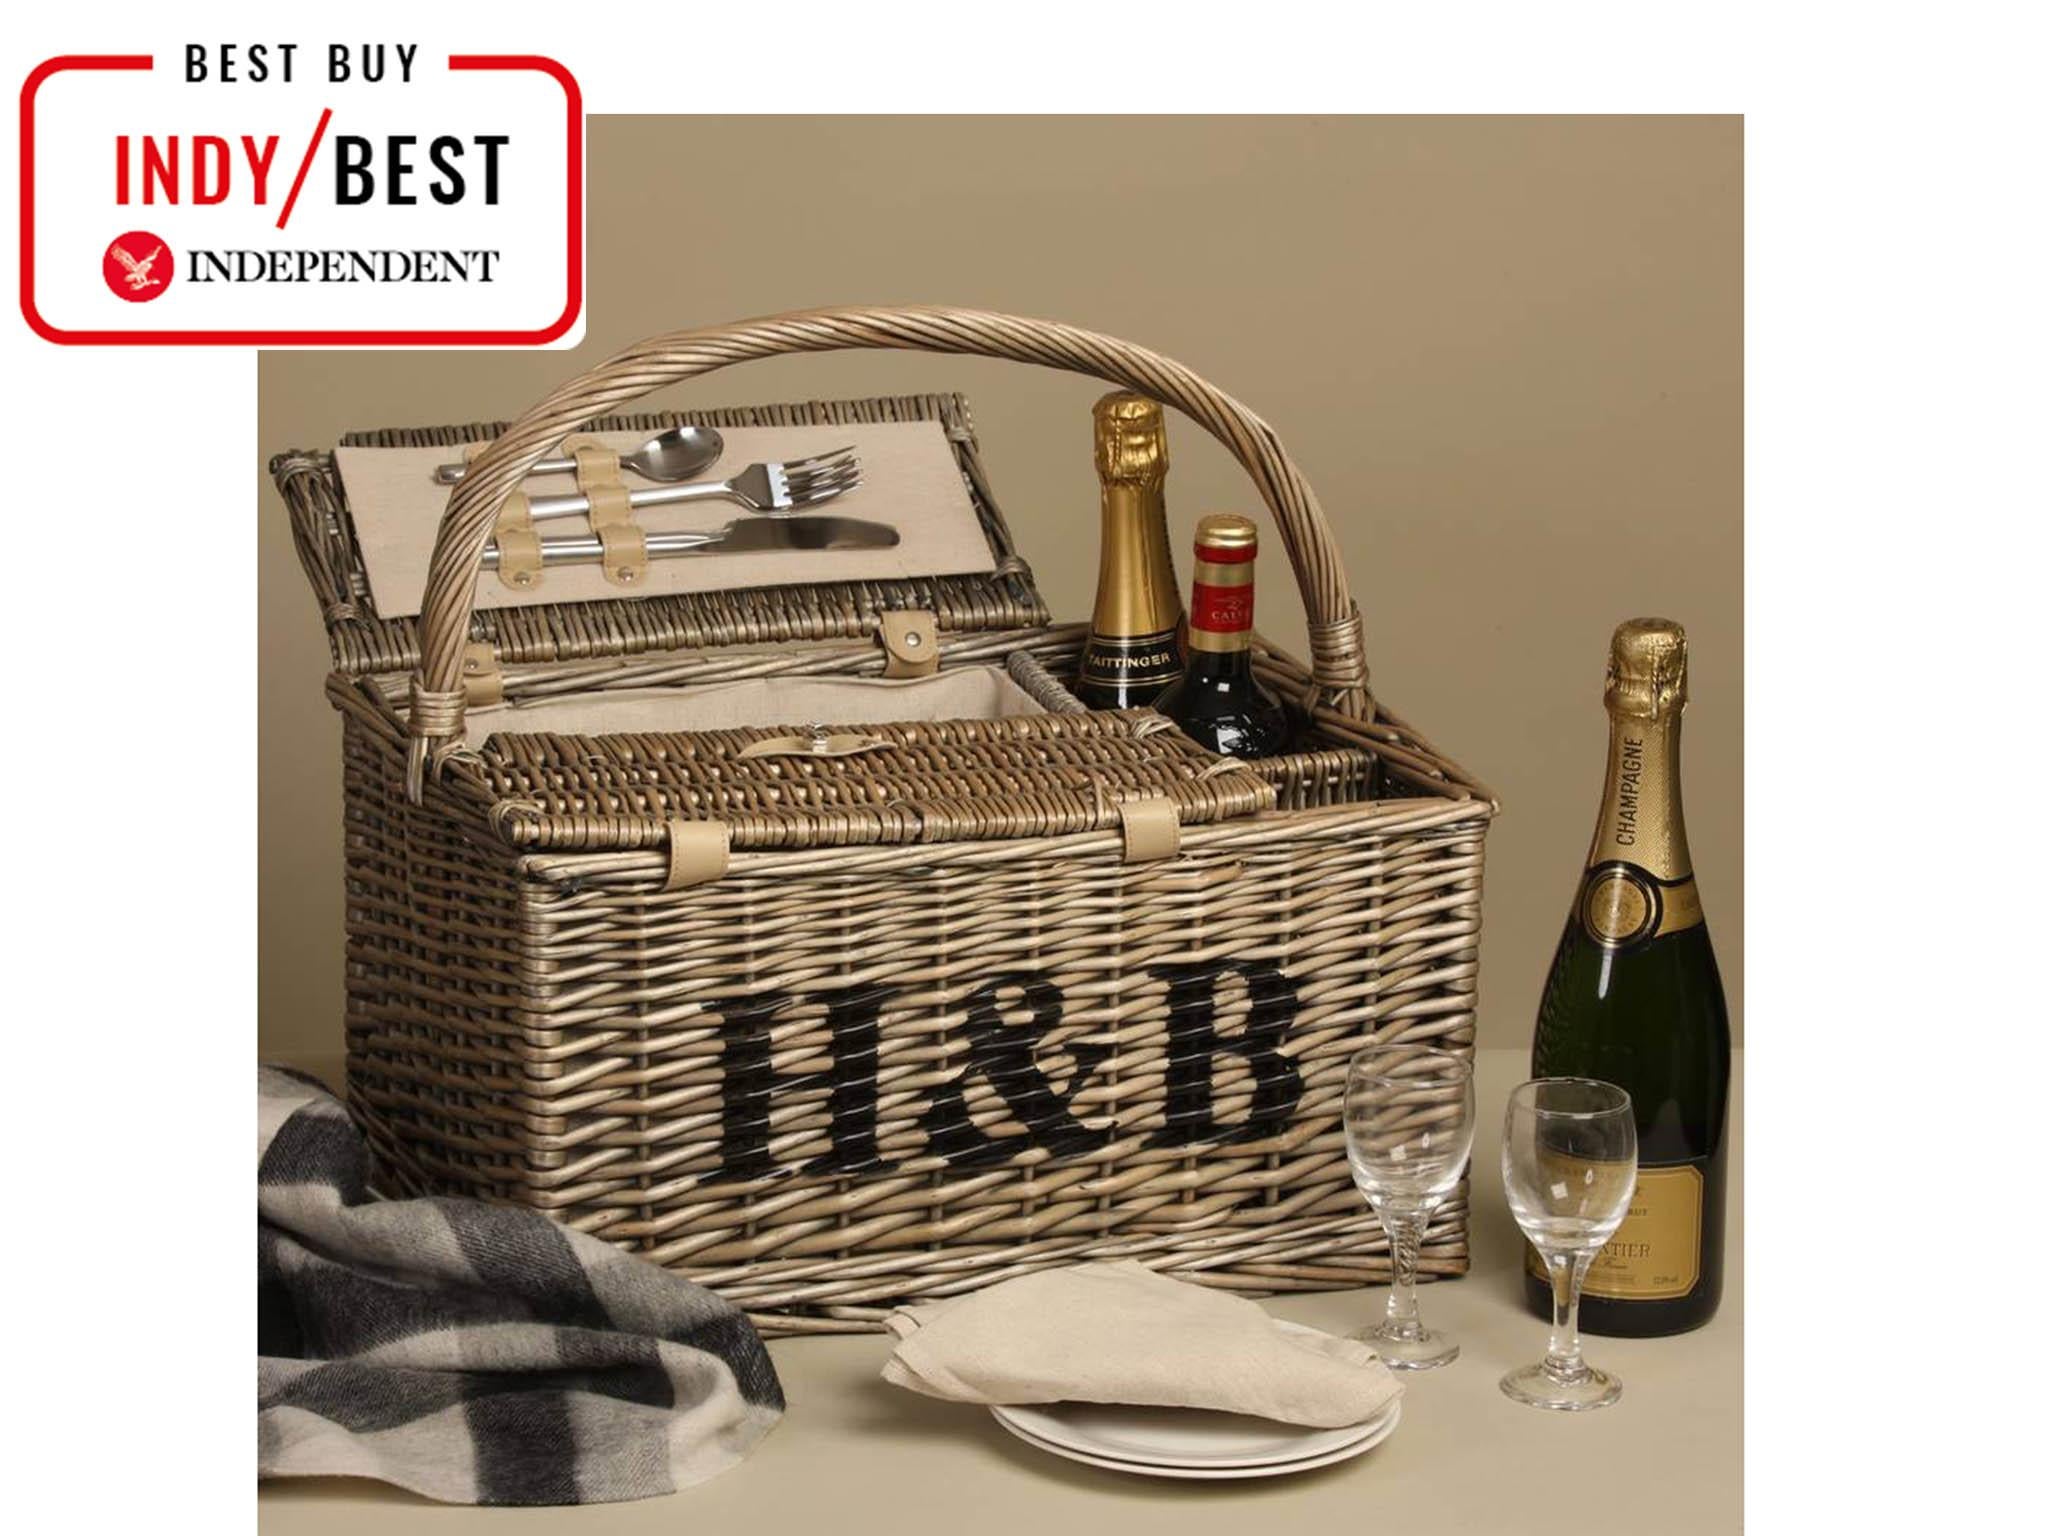 1 pc BASIC HOUSE Handbag Shaped High Handle Wicker Shopping Baskets collection Gift Hamper Fabric Lining 